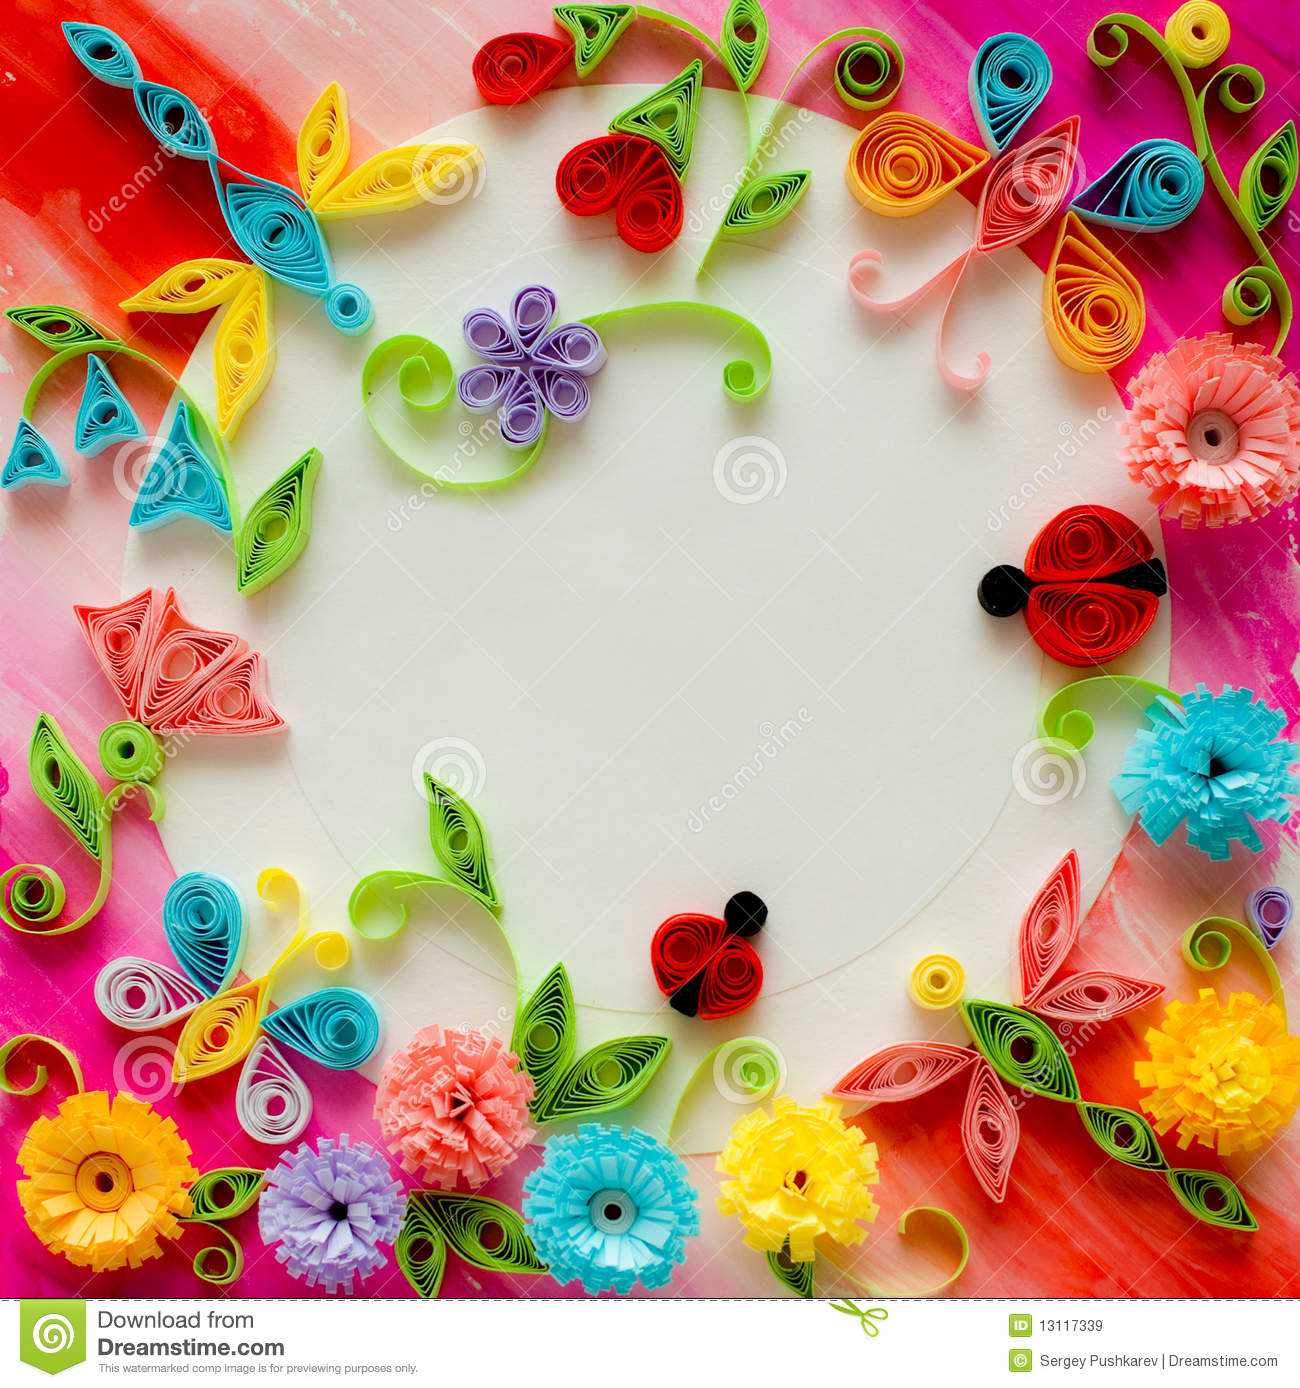 Quilling Greeting Card Blank Template Stock Image – Image Of Pertaining To Free Blank Greeting Card Templates For Word